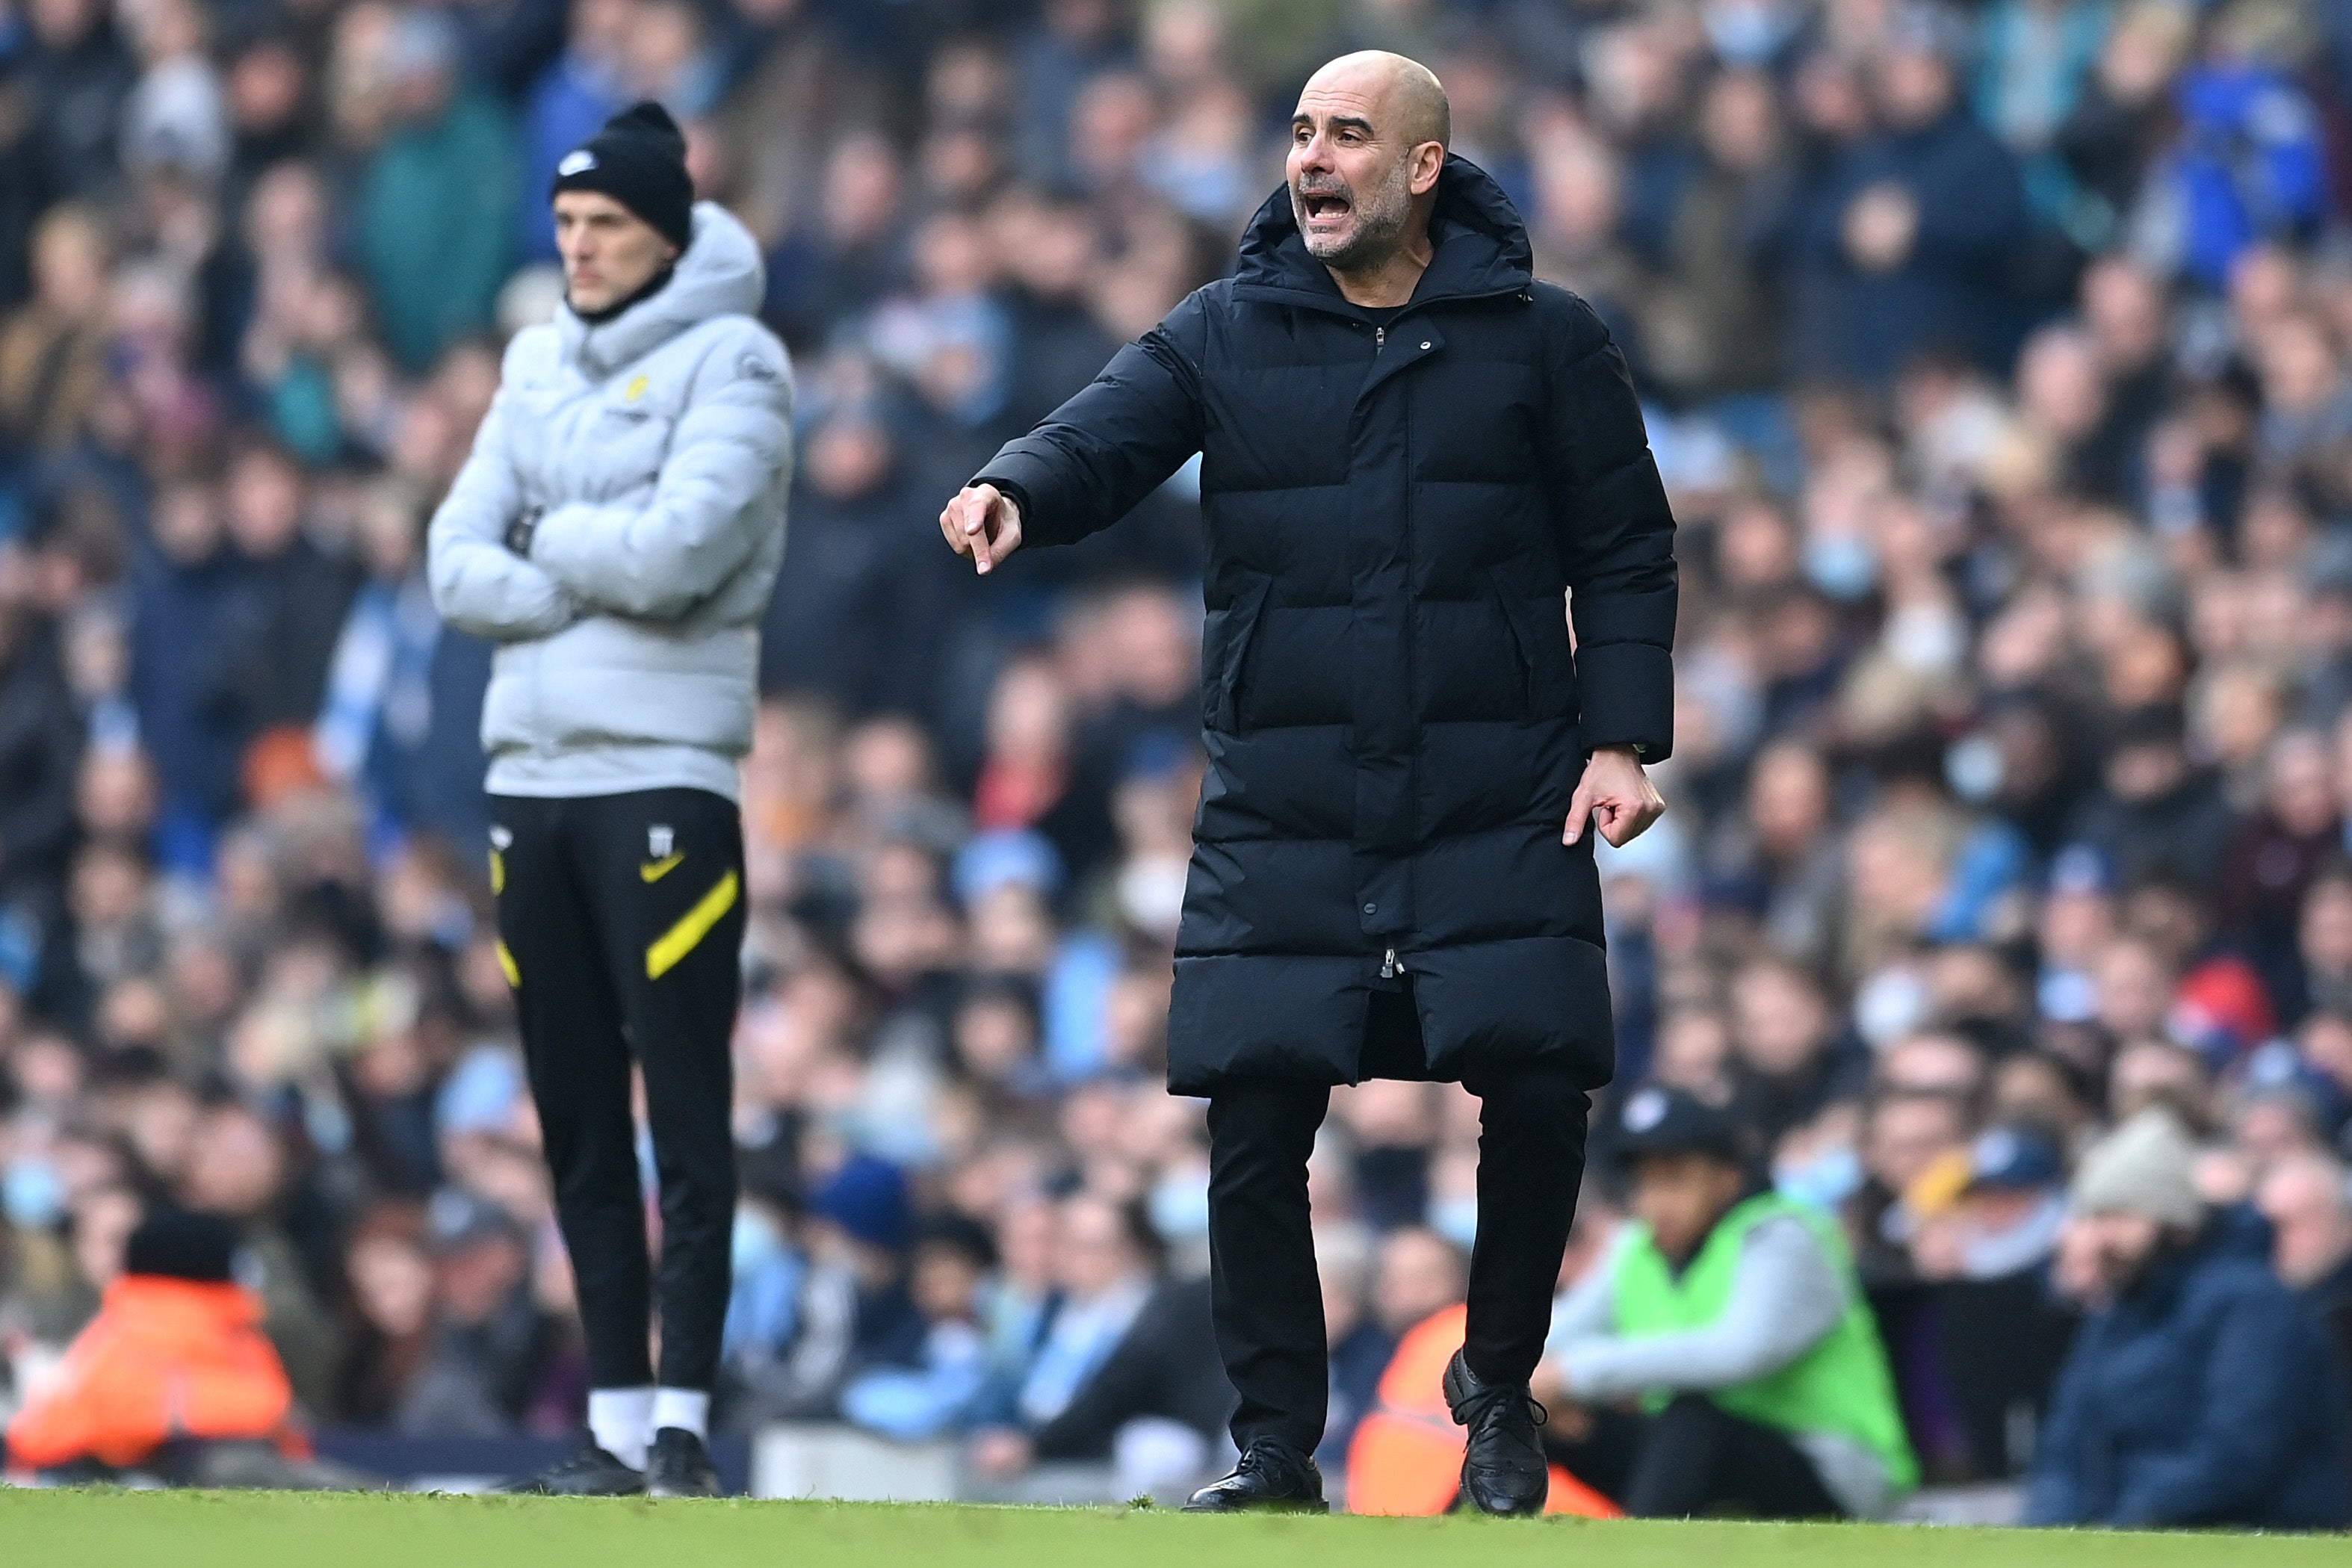 Pep Guardiola is closing in on a fourth Premier League title in five seasons